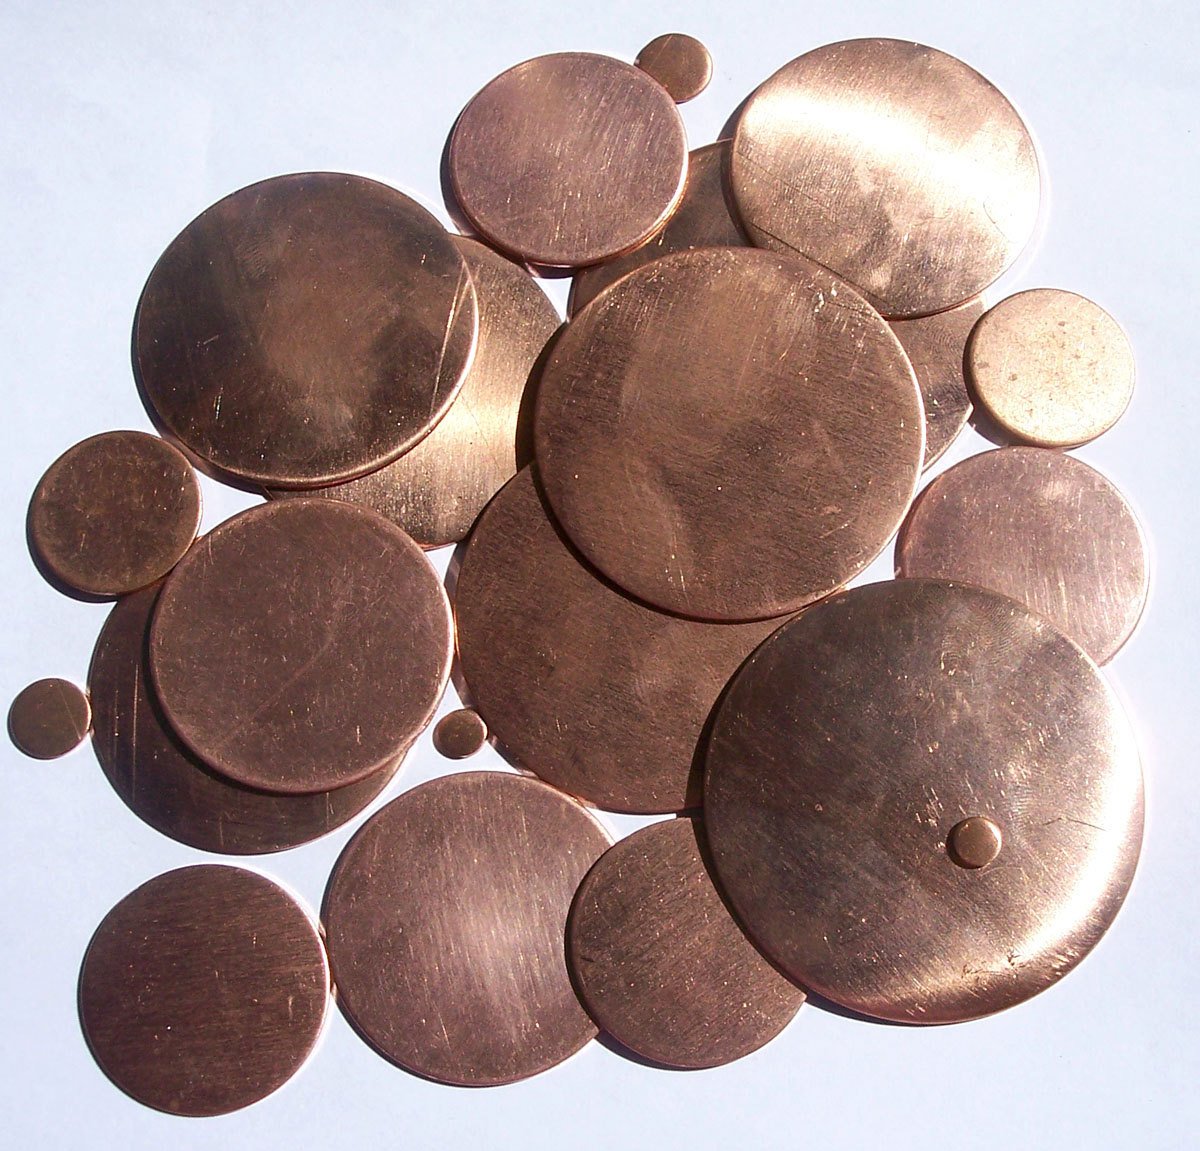 Copper Jewelry Blank Disc 30mm 20G Shape for Enameling Stamping Texturing - 1 3/16 inch - 4 Pieces